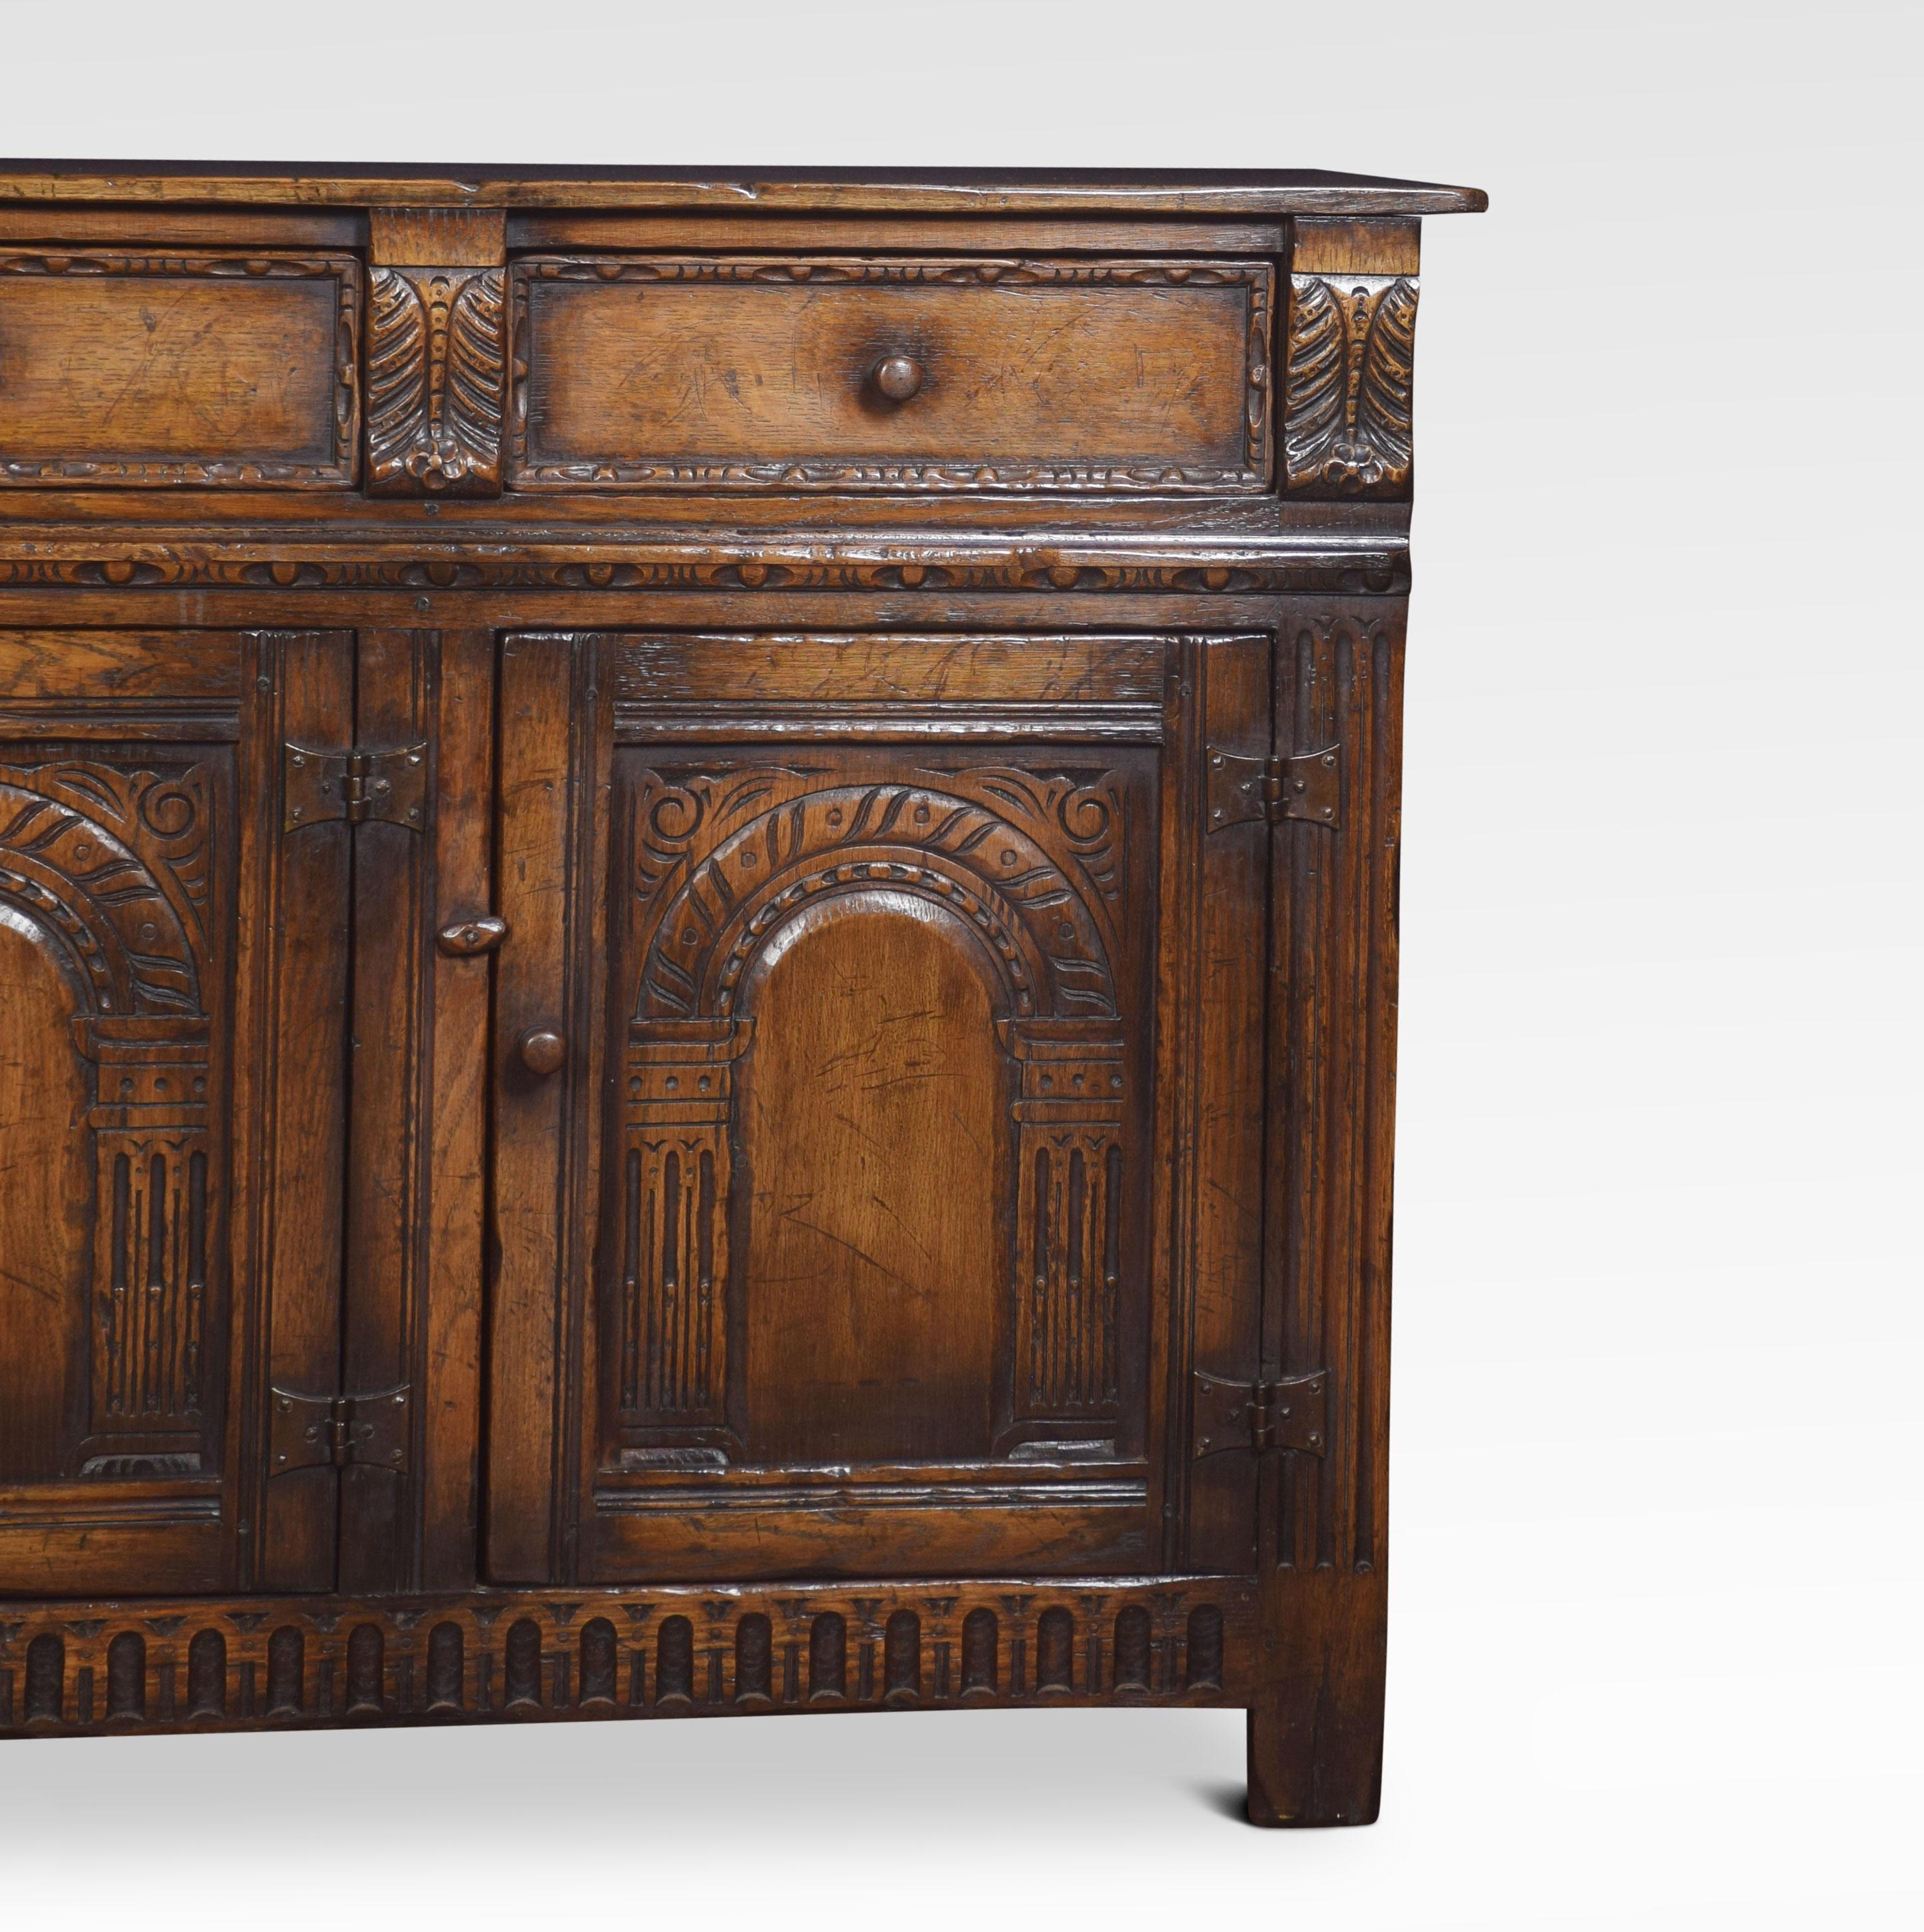 Jacobean style oak dresser base, the large rectangular top to the frieze fitted with three drawers above three-paneled and fluted doors opening to reveal a large storage area. All raised up on style feet.
Dimensions
Height 36 inches
Width 66